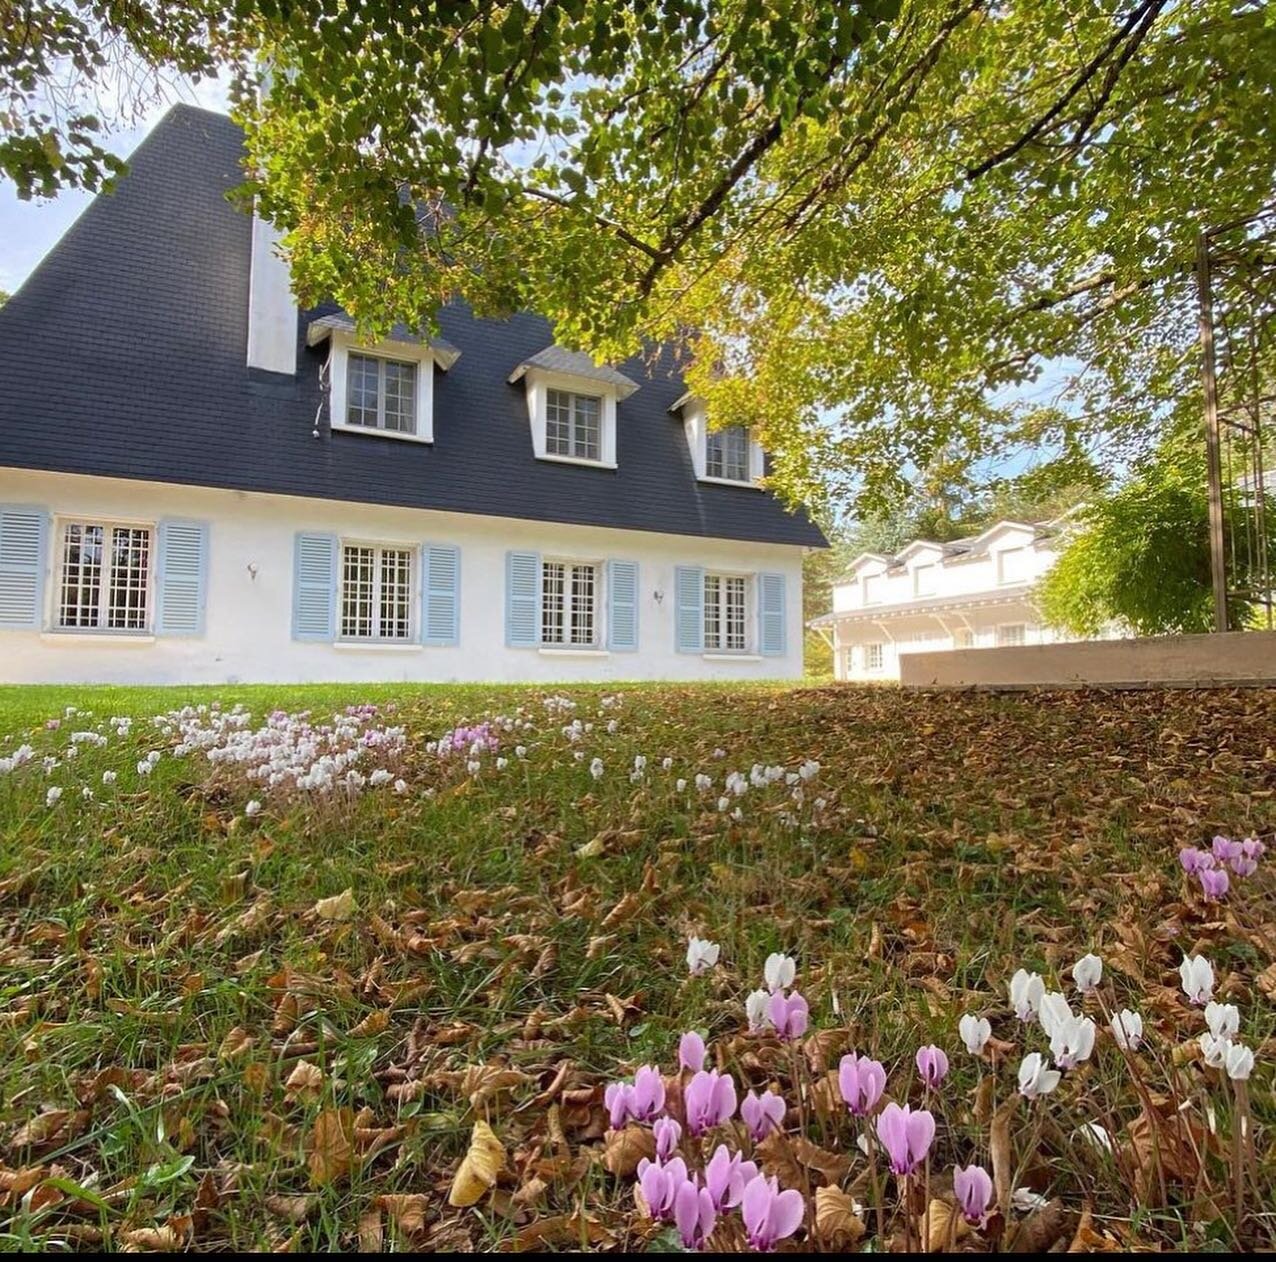 We are currently on a tour of Europe, scoping out luxury group accommodation and getting some great ideas for Graysons Estate. We have just checked out of this gorgeous &quot;manoir&quot;  in France. Like Graysons, it can sleep up to 30 guests and ha